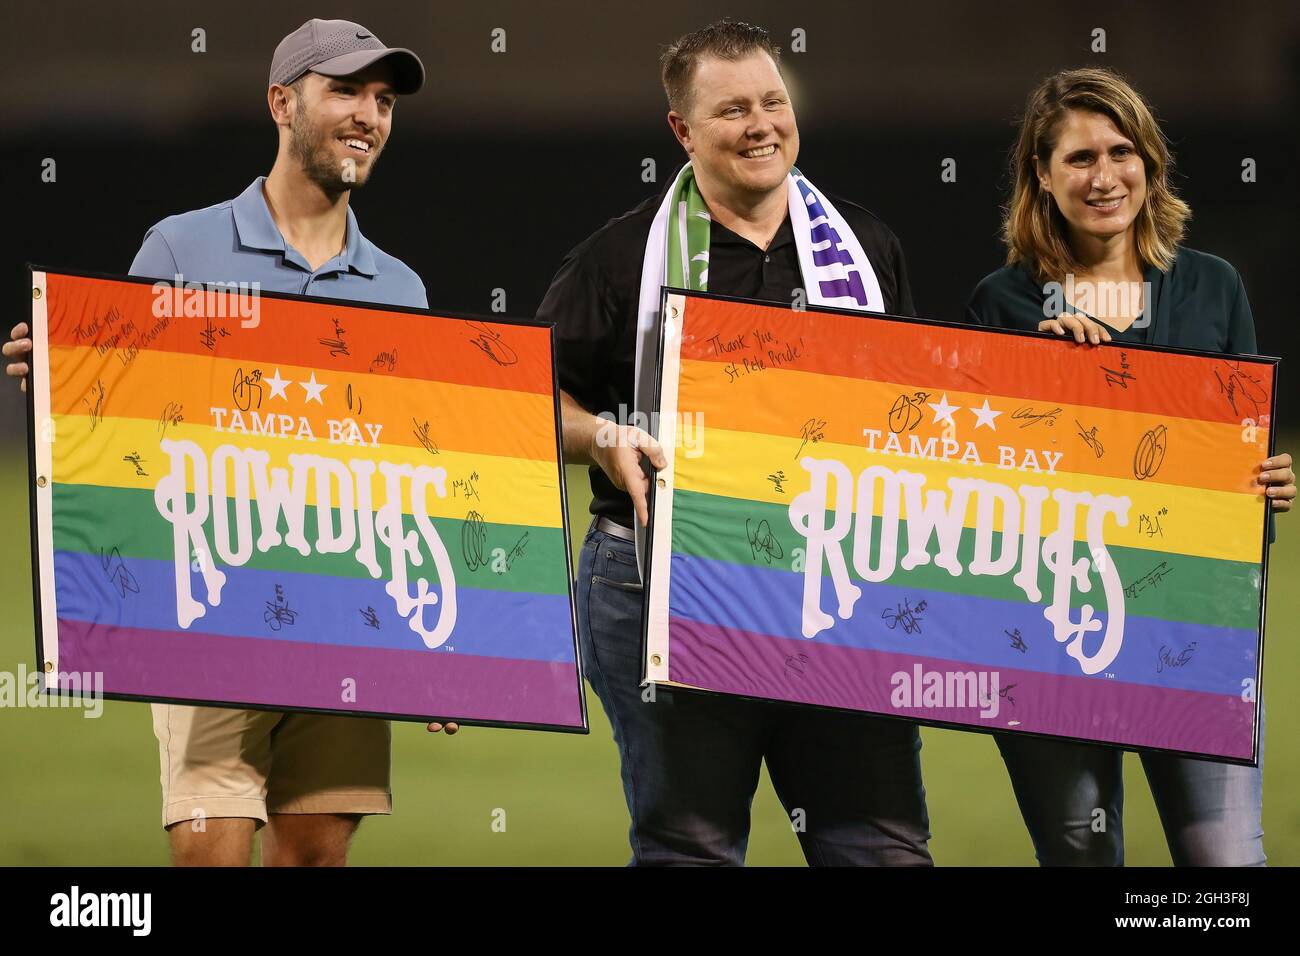 St. Petersburg, FL; The Tampa Bay Rowdies celebrated the Tampa Bay area's LGBTQ+ community at halftime during a USL soccer game against the Oakland Ro Stock Photo